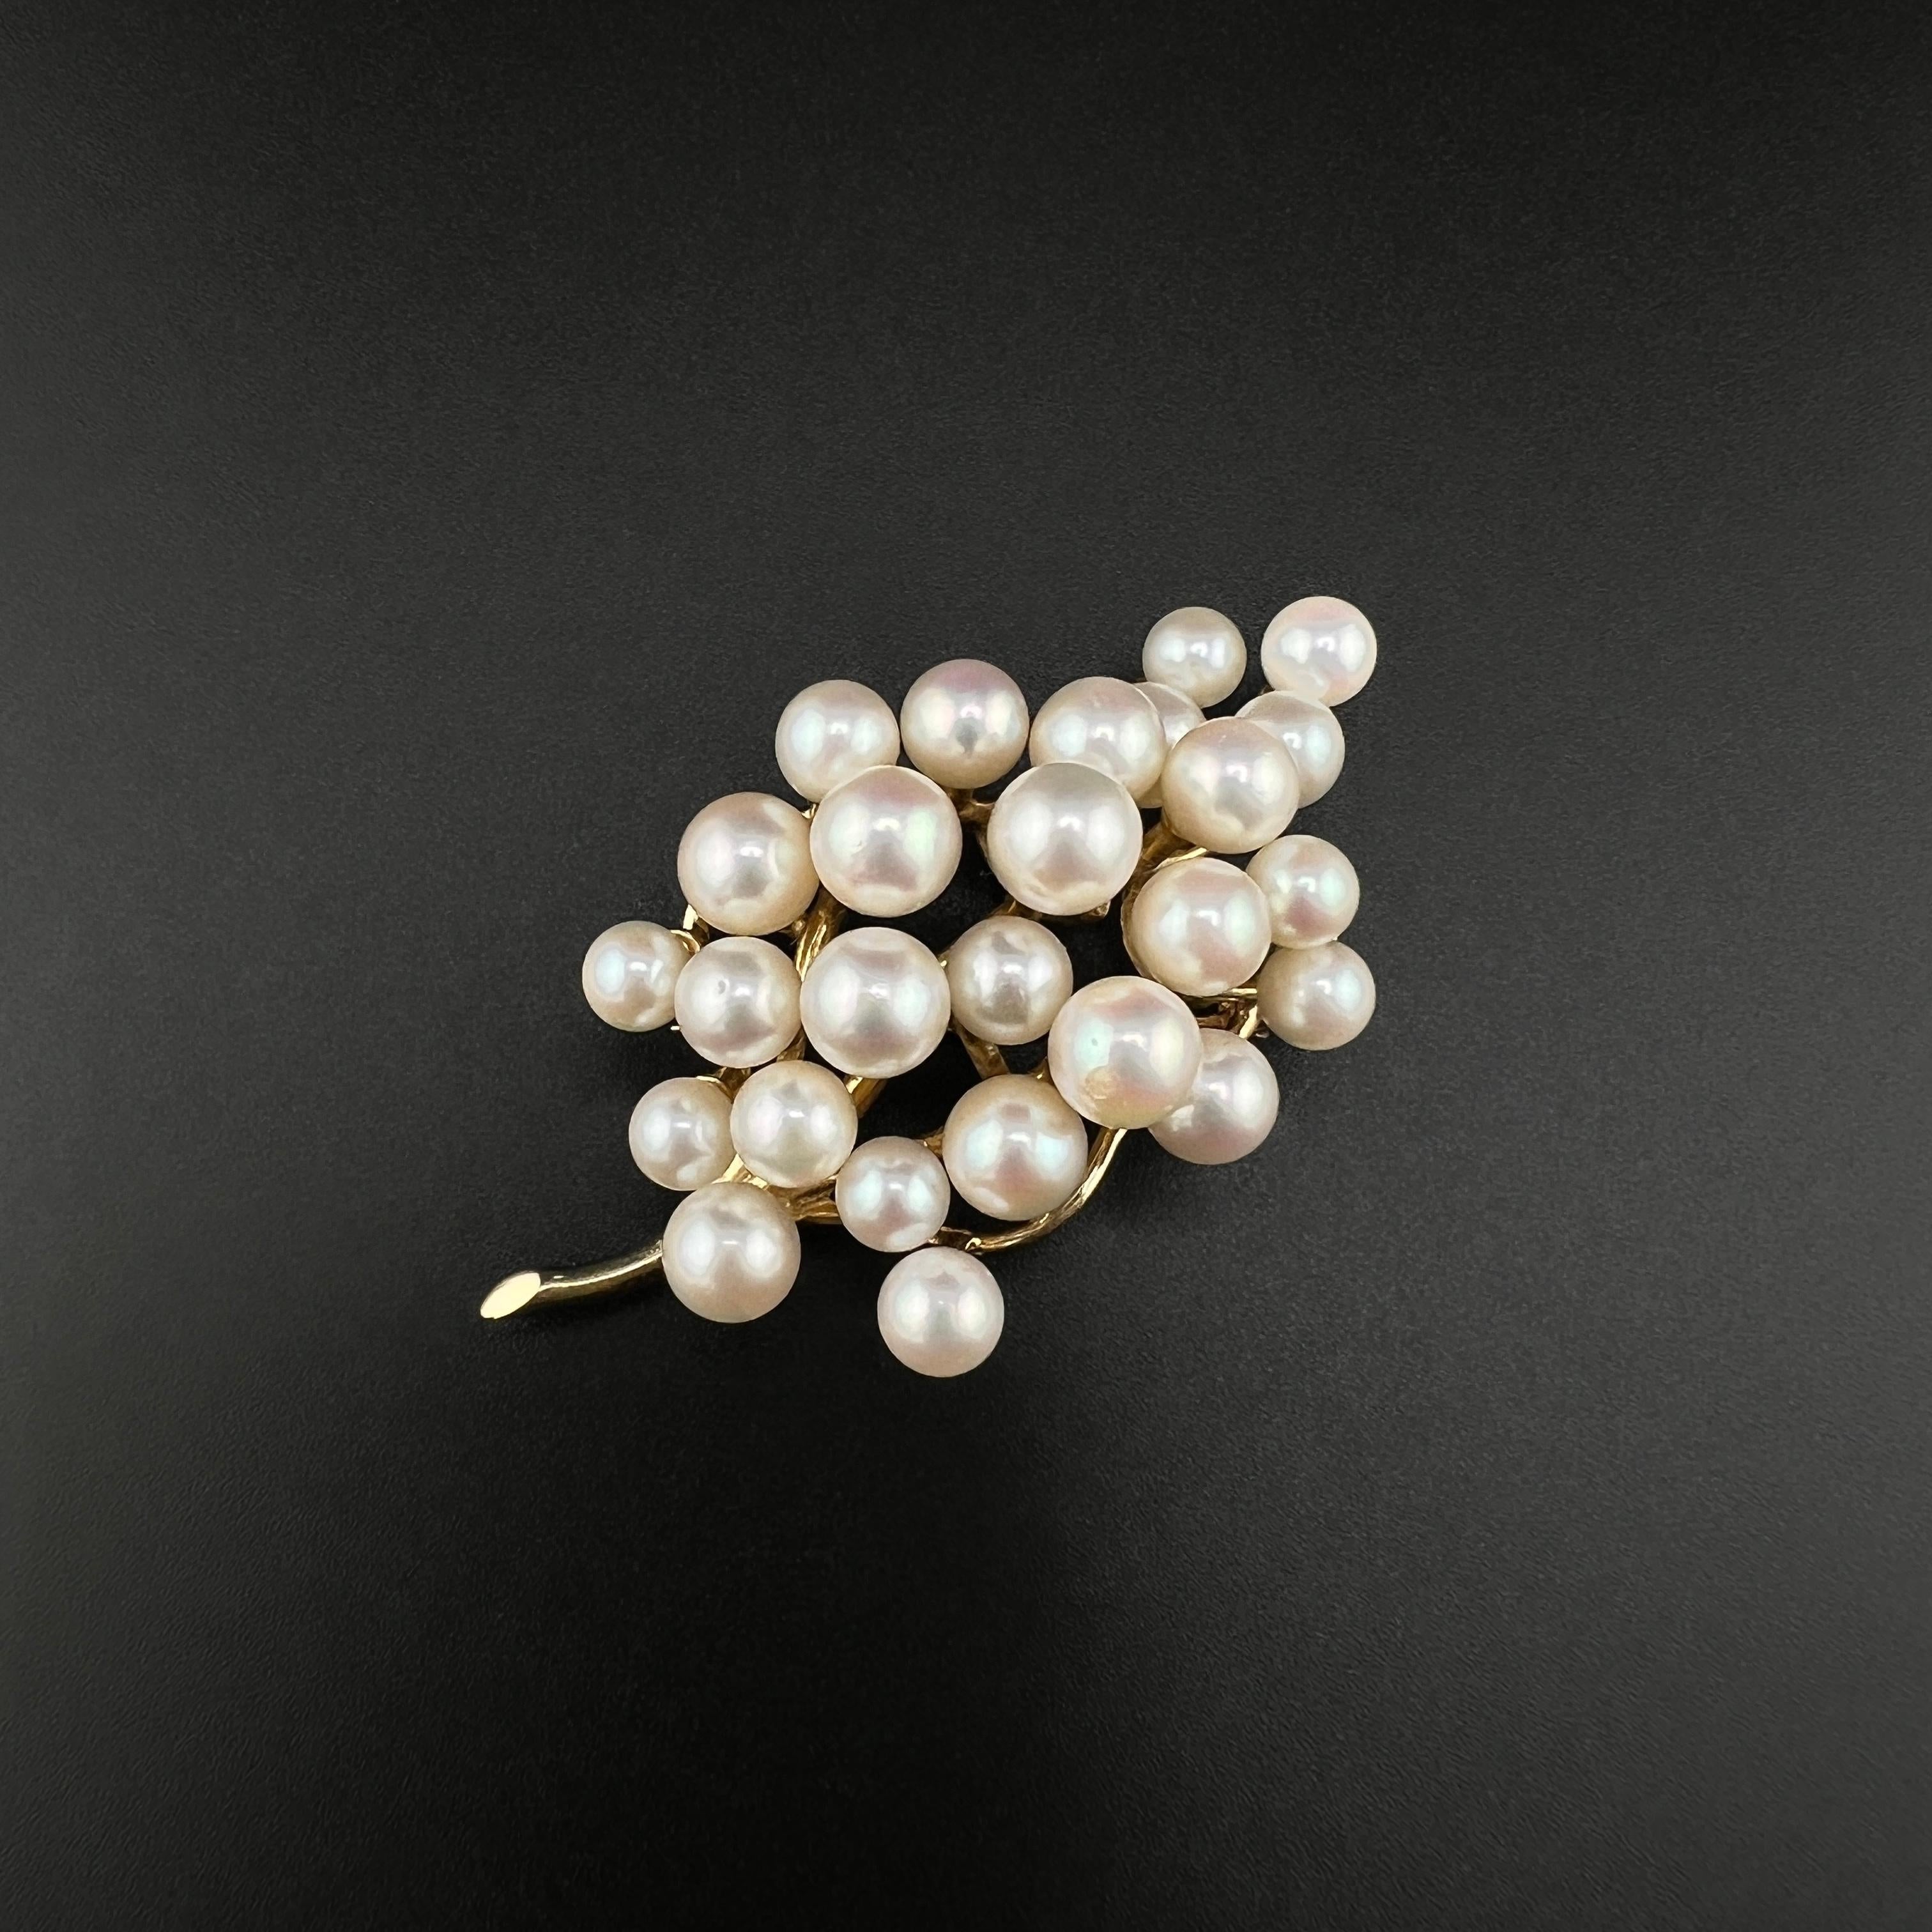 A satisfying presentation of 26 5-7mm Akoya pearls gracefully set on a 14k yellow gold branch with a 1-inch pin. The brooch is approximately 2 inches long and 1 inch wide. 